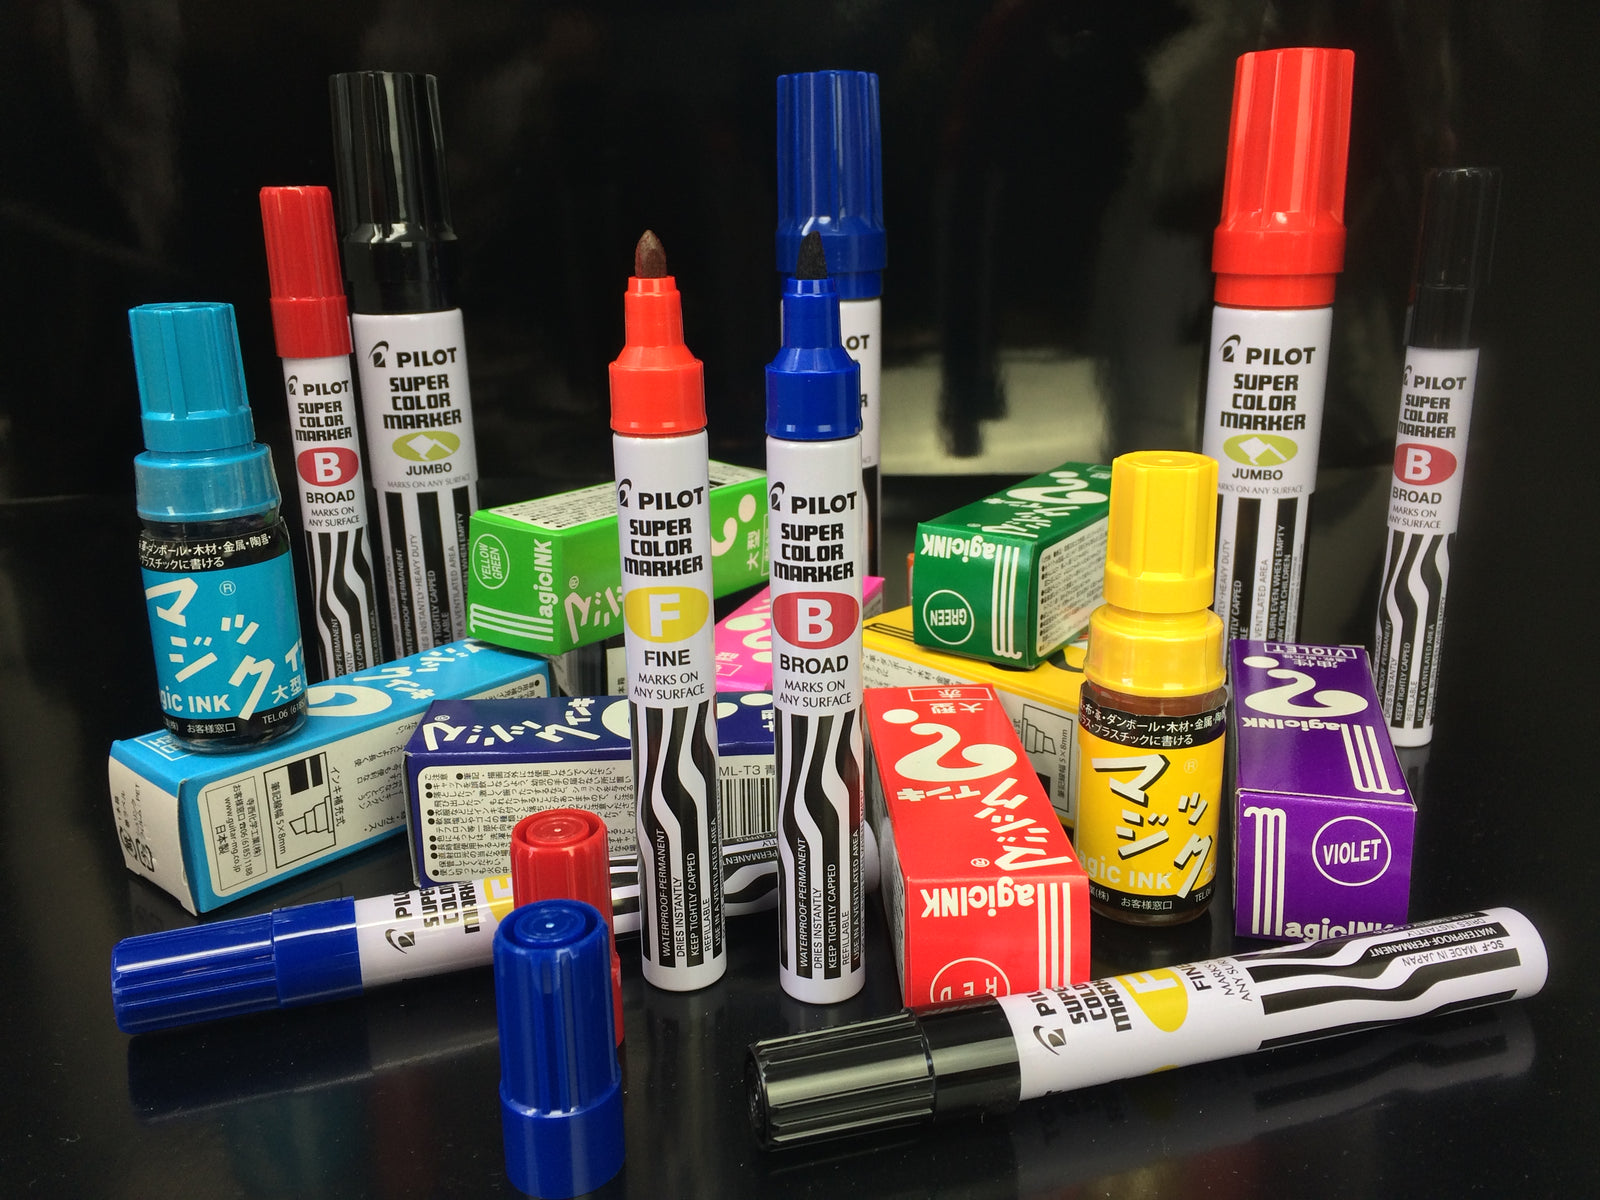 Mr. Pen-Paint Markers, 6 Pack, Fine Point Tip Markers, Permanent Markers  Assorted Colors, Oil Based Markers, Colored Paint Pen 